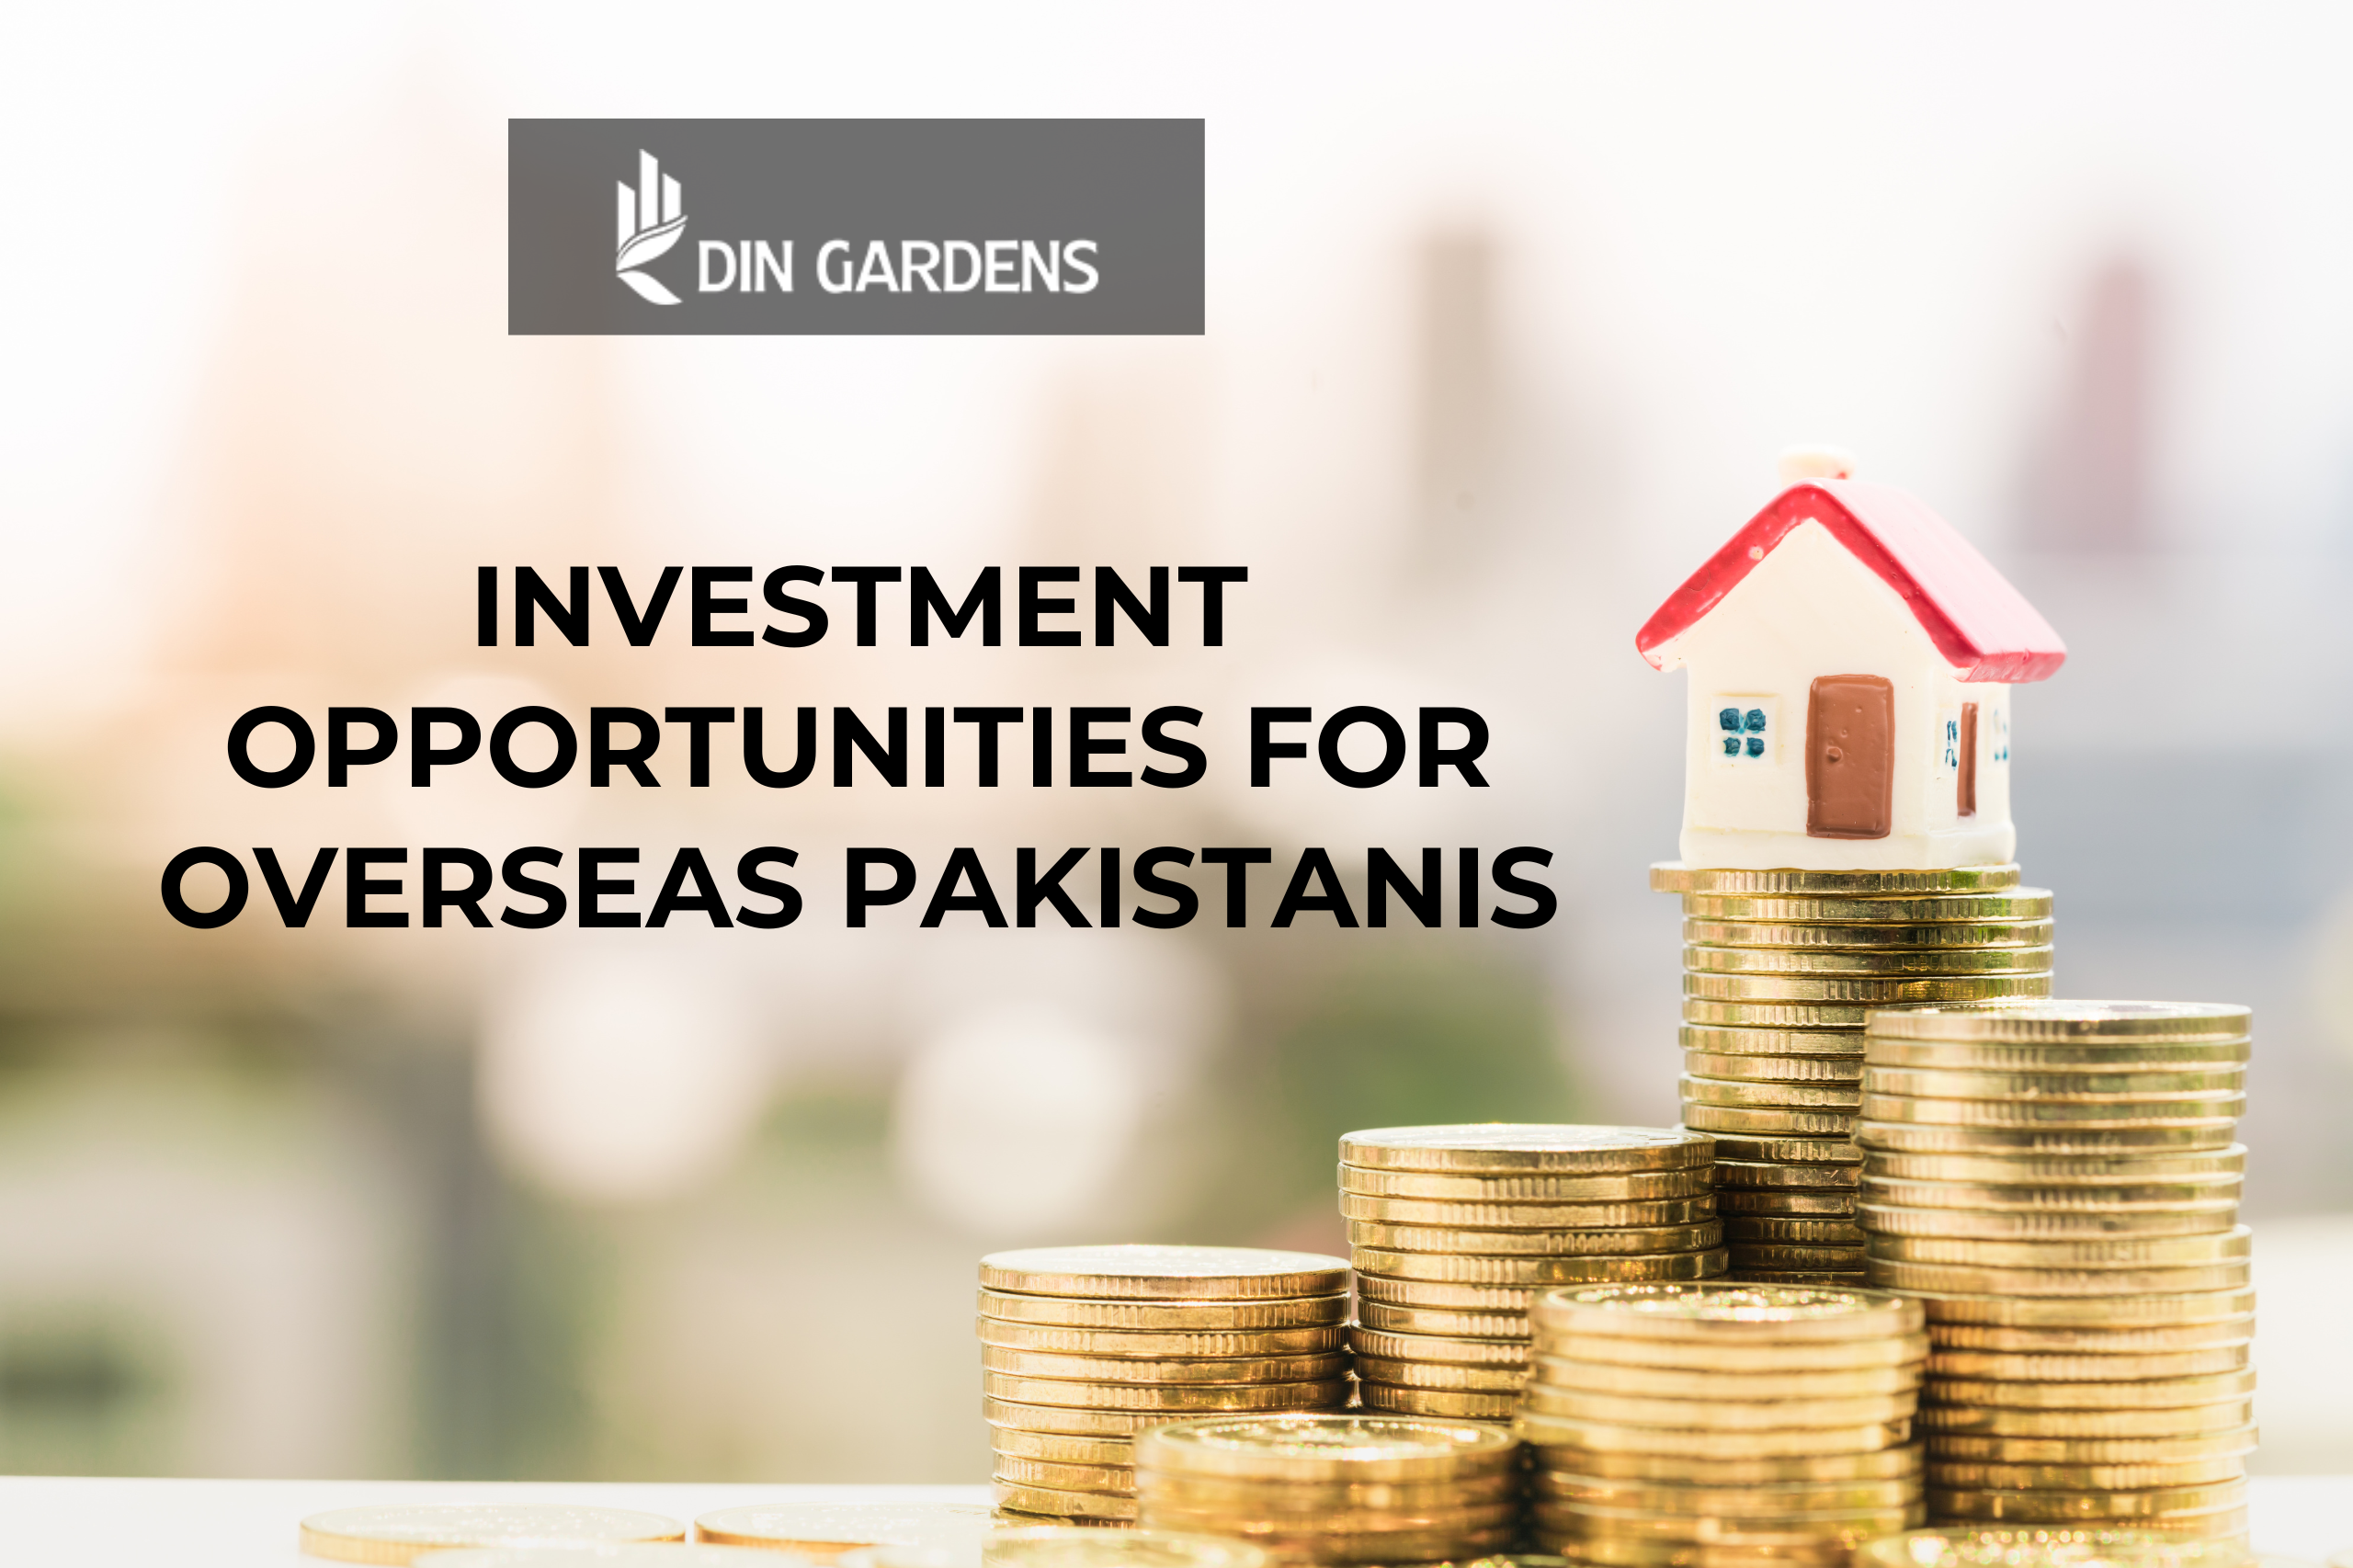 Investment opportunities for overseas pakistanis